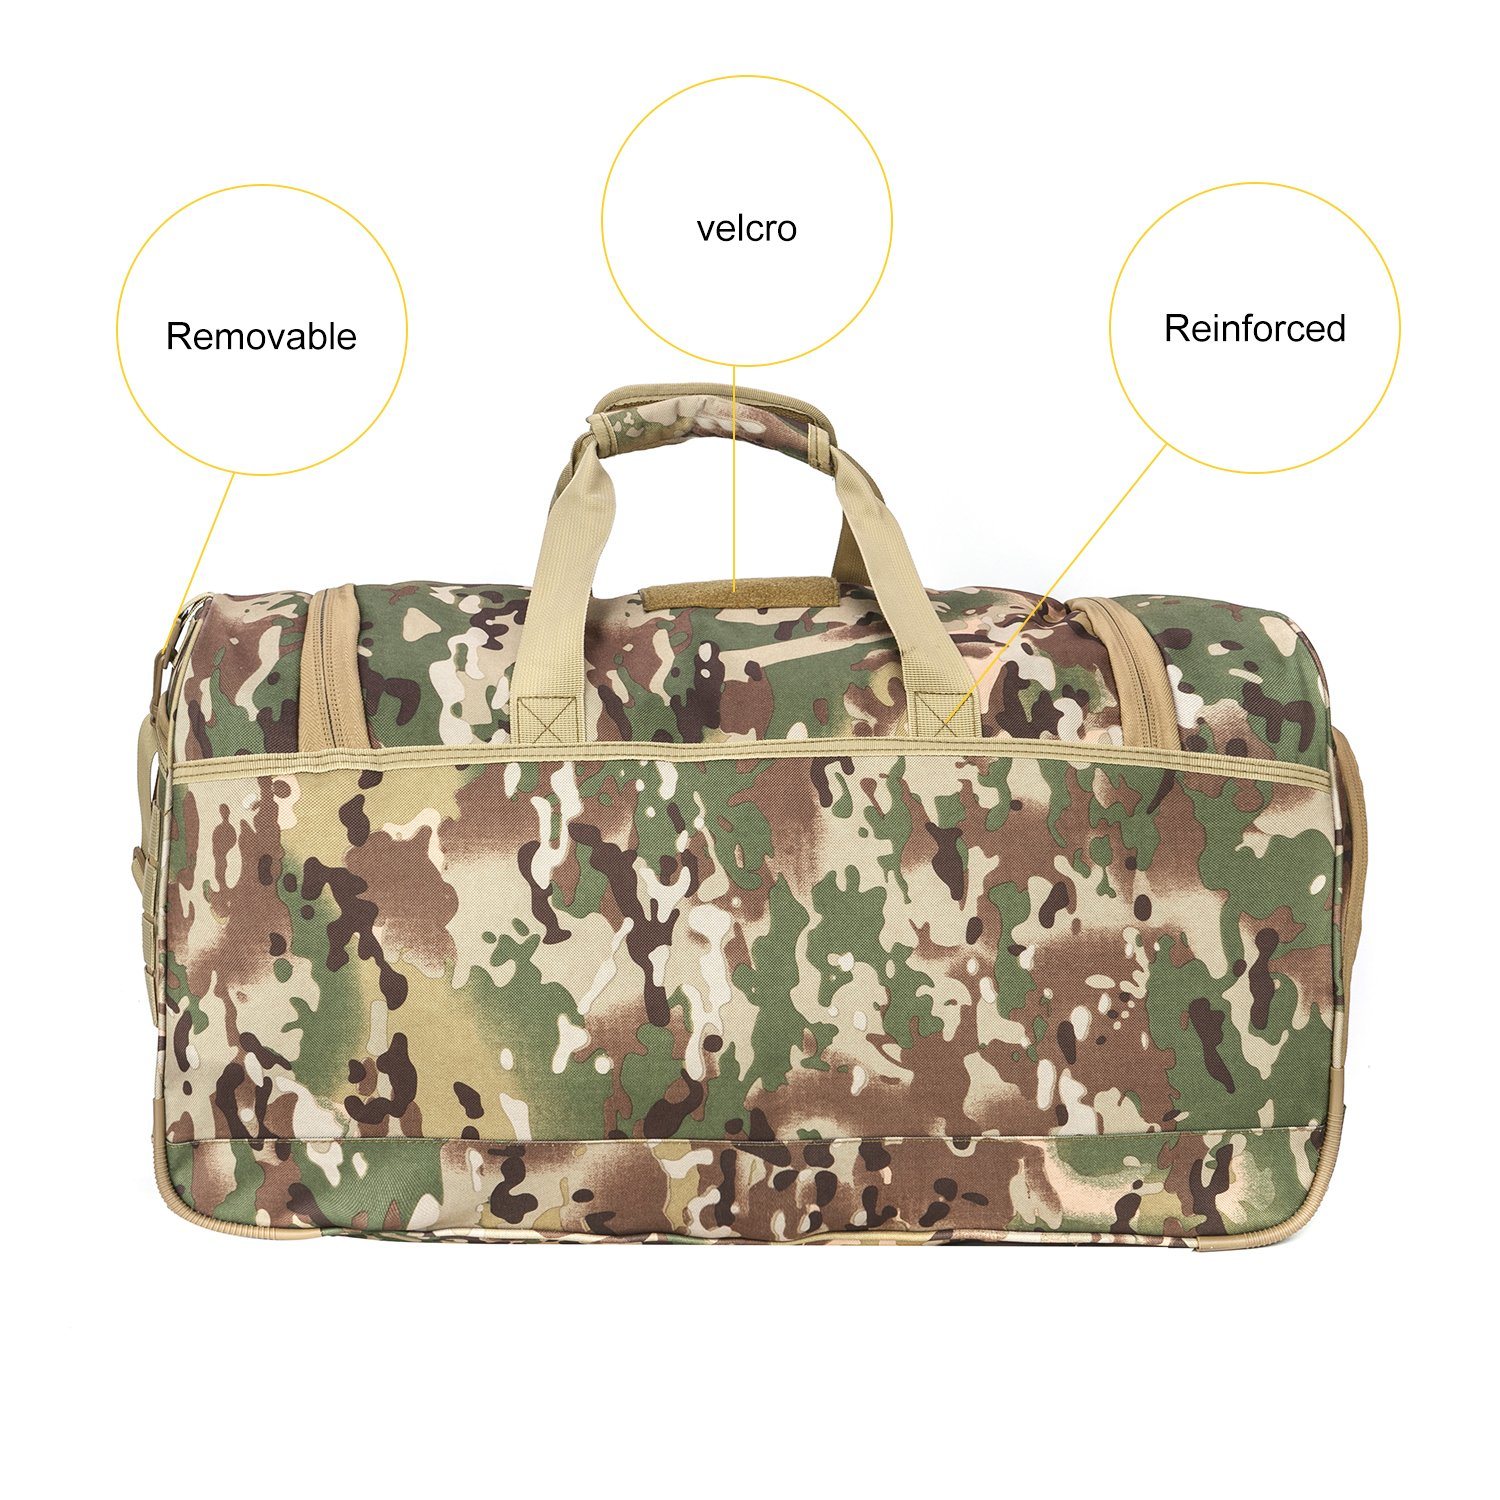 Premium Military Tactical Large Capacity Bag with Shoe Compartment